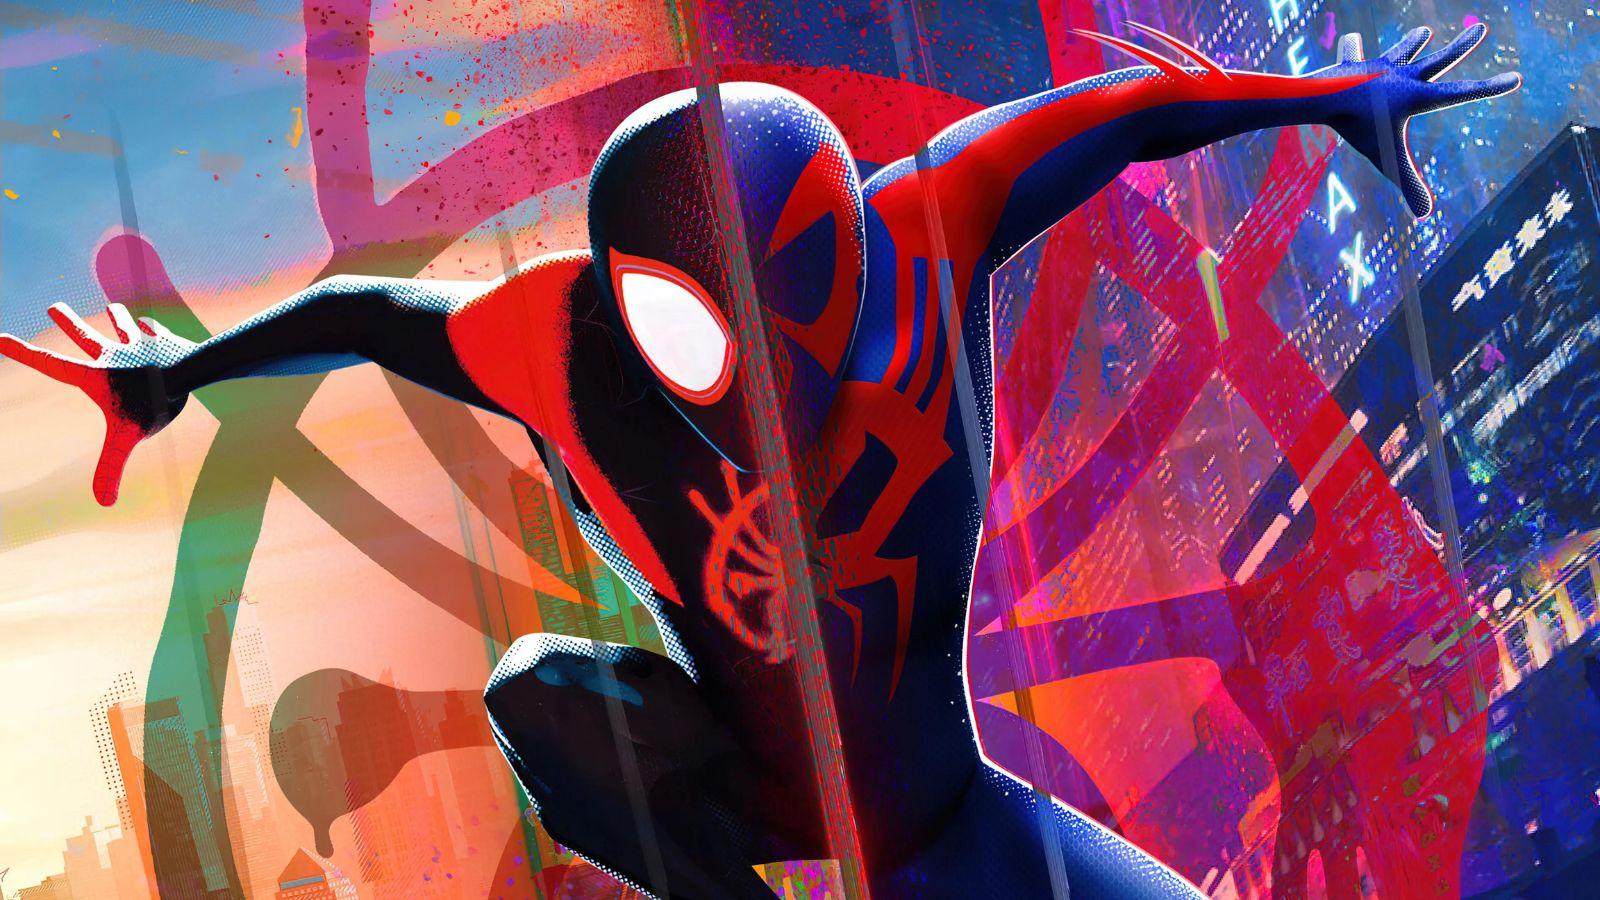 Miles Morales and Miguel O Hara as Spider-Man in Across the Spider-Verse poster